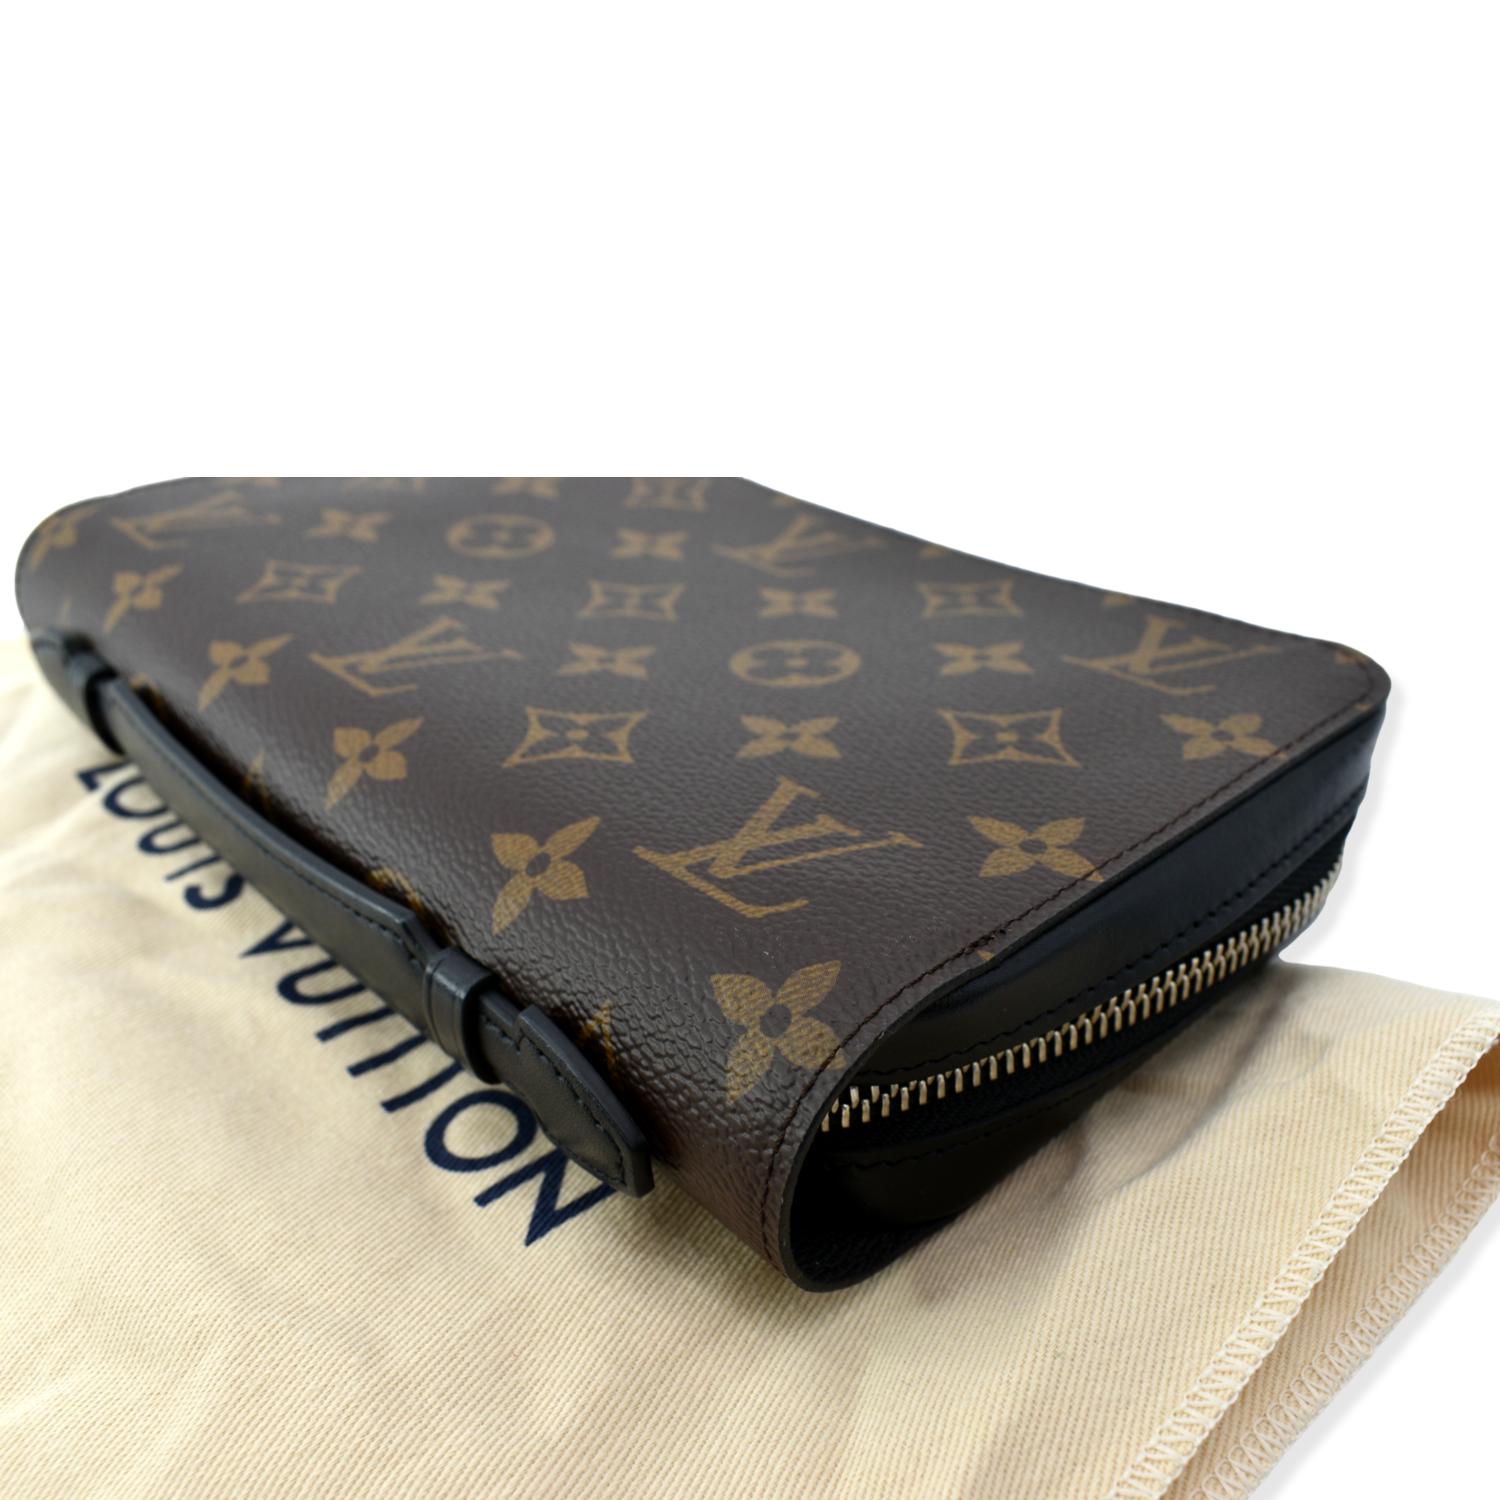 Zippy XL Wallet Monogram Eclipse - Wallets and Small Leather Goods